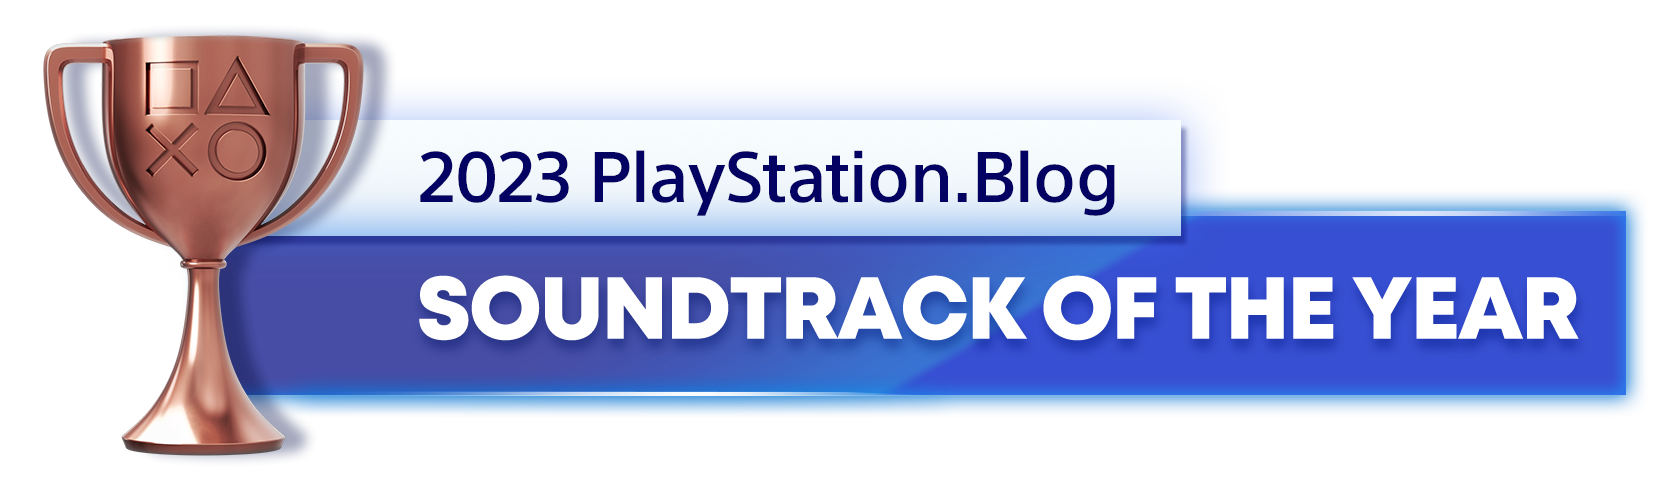  "Bronze Trophy for the 2023 PlayStation Blog Soundtrack of the Year Winner"